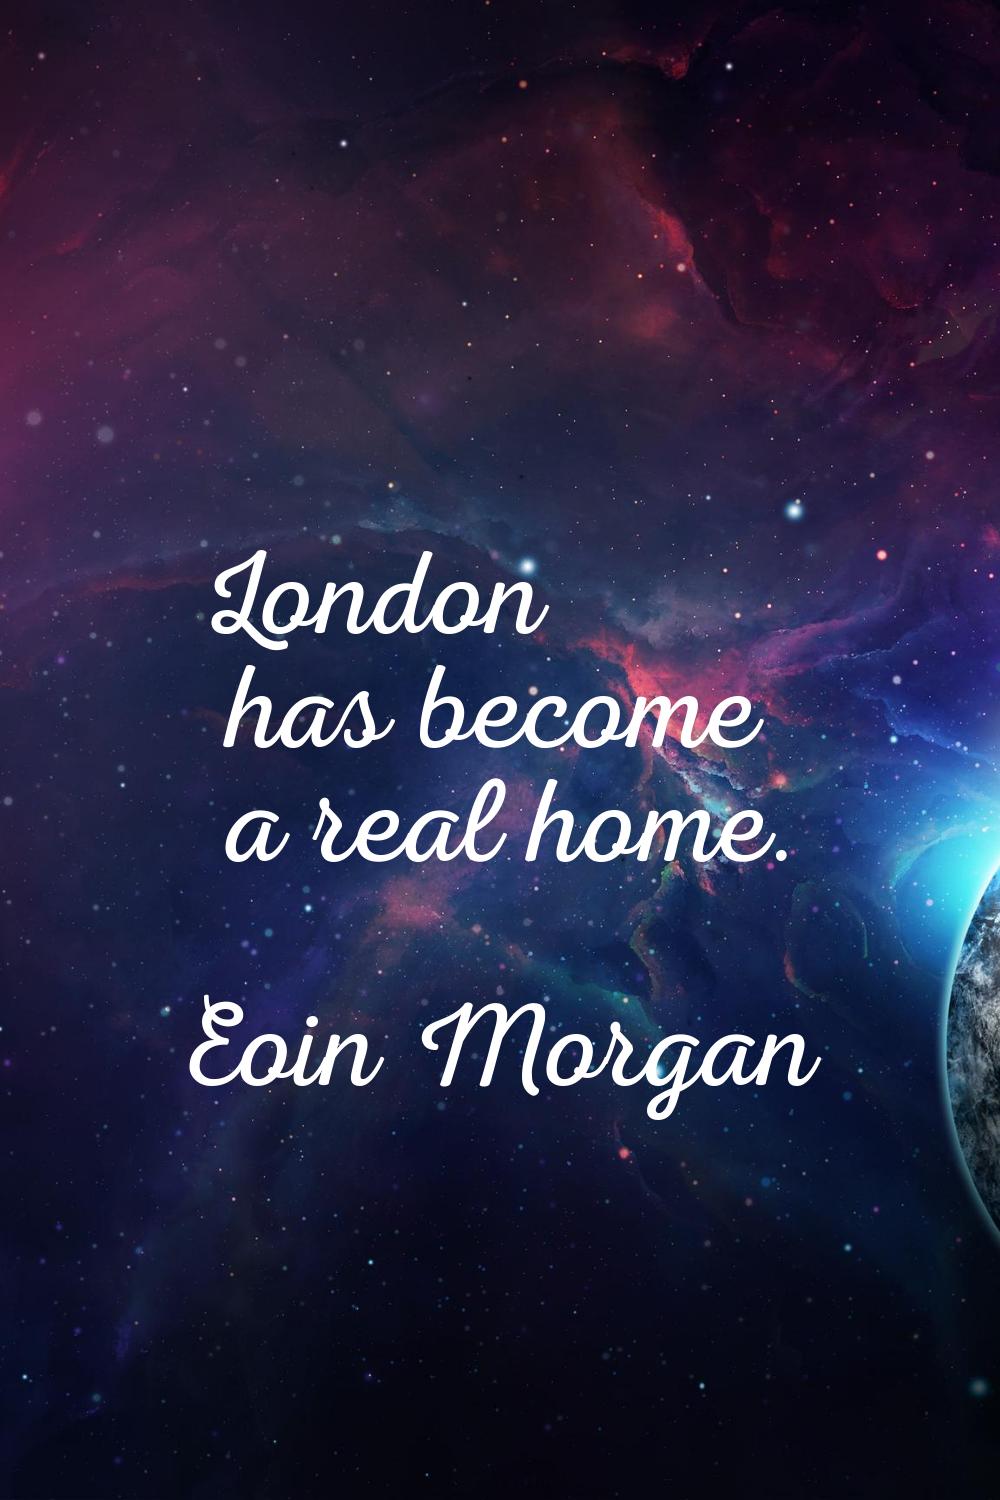 London has become a real home.